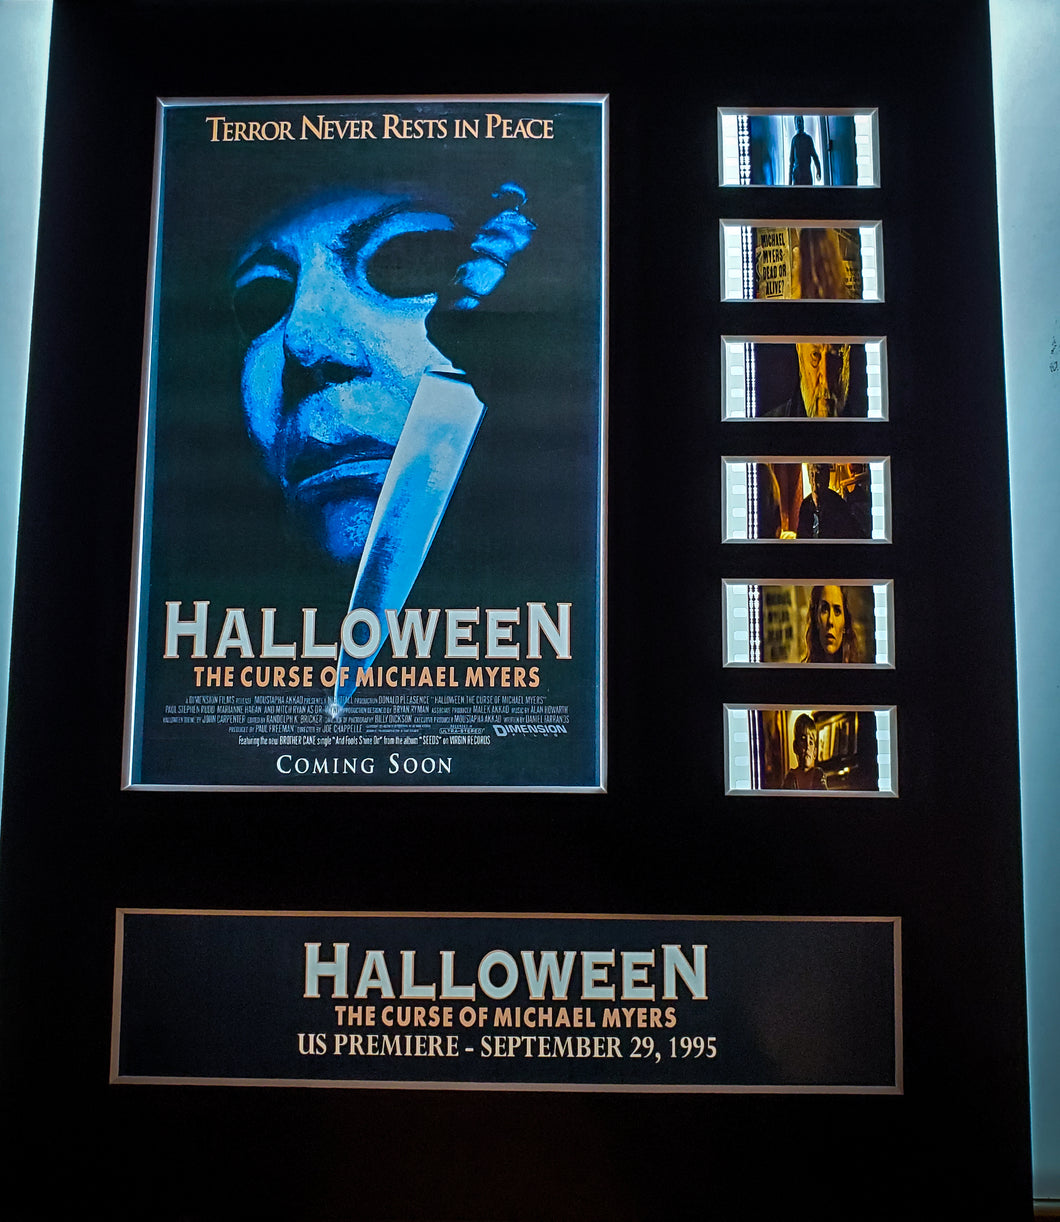 HALLOWEEN 6 1995 The Curse of Michael Myers 35mm Movie Film Cell Display 8x10 Presentation Horror